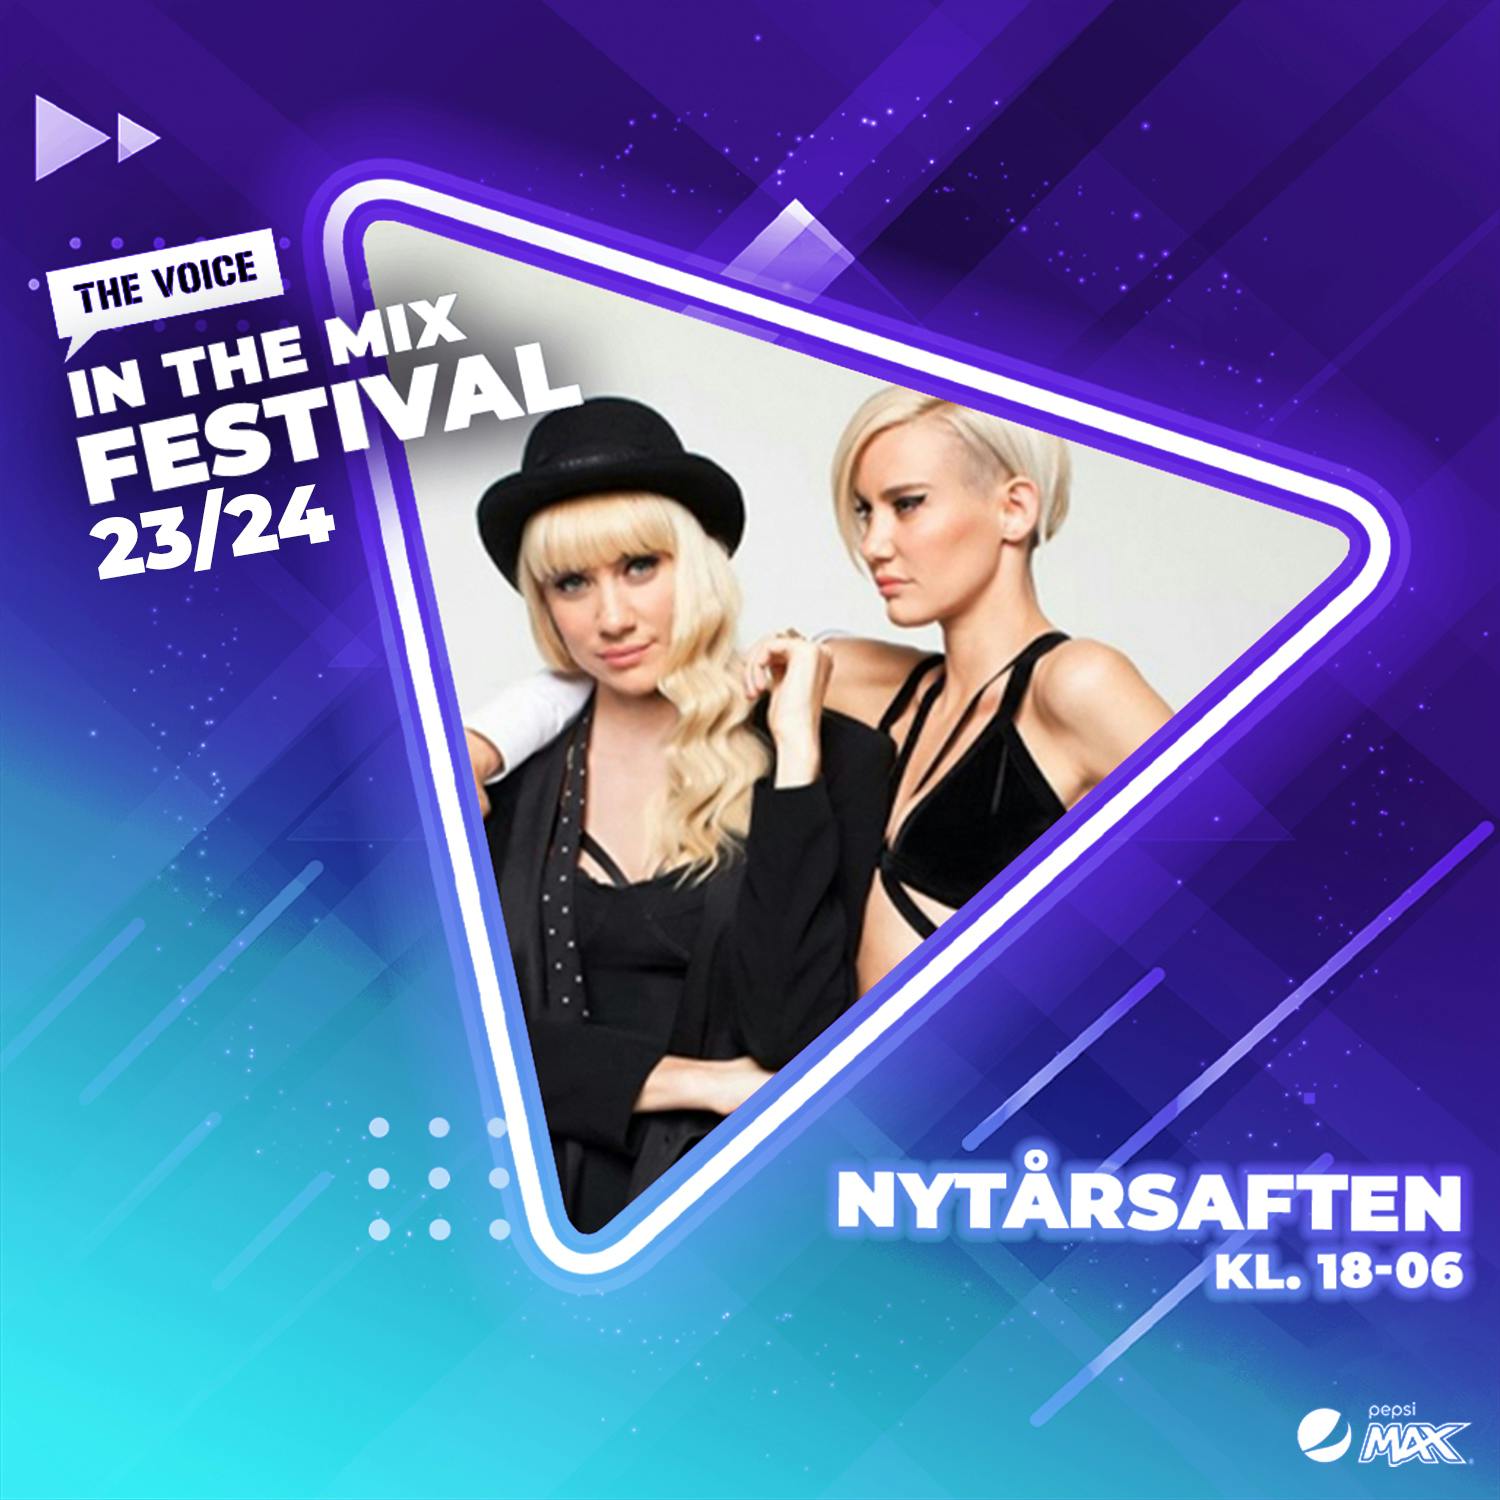 Nervo - The Voice In The Mix Festival 23/24